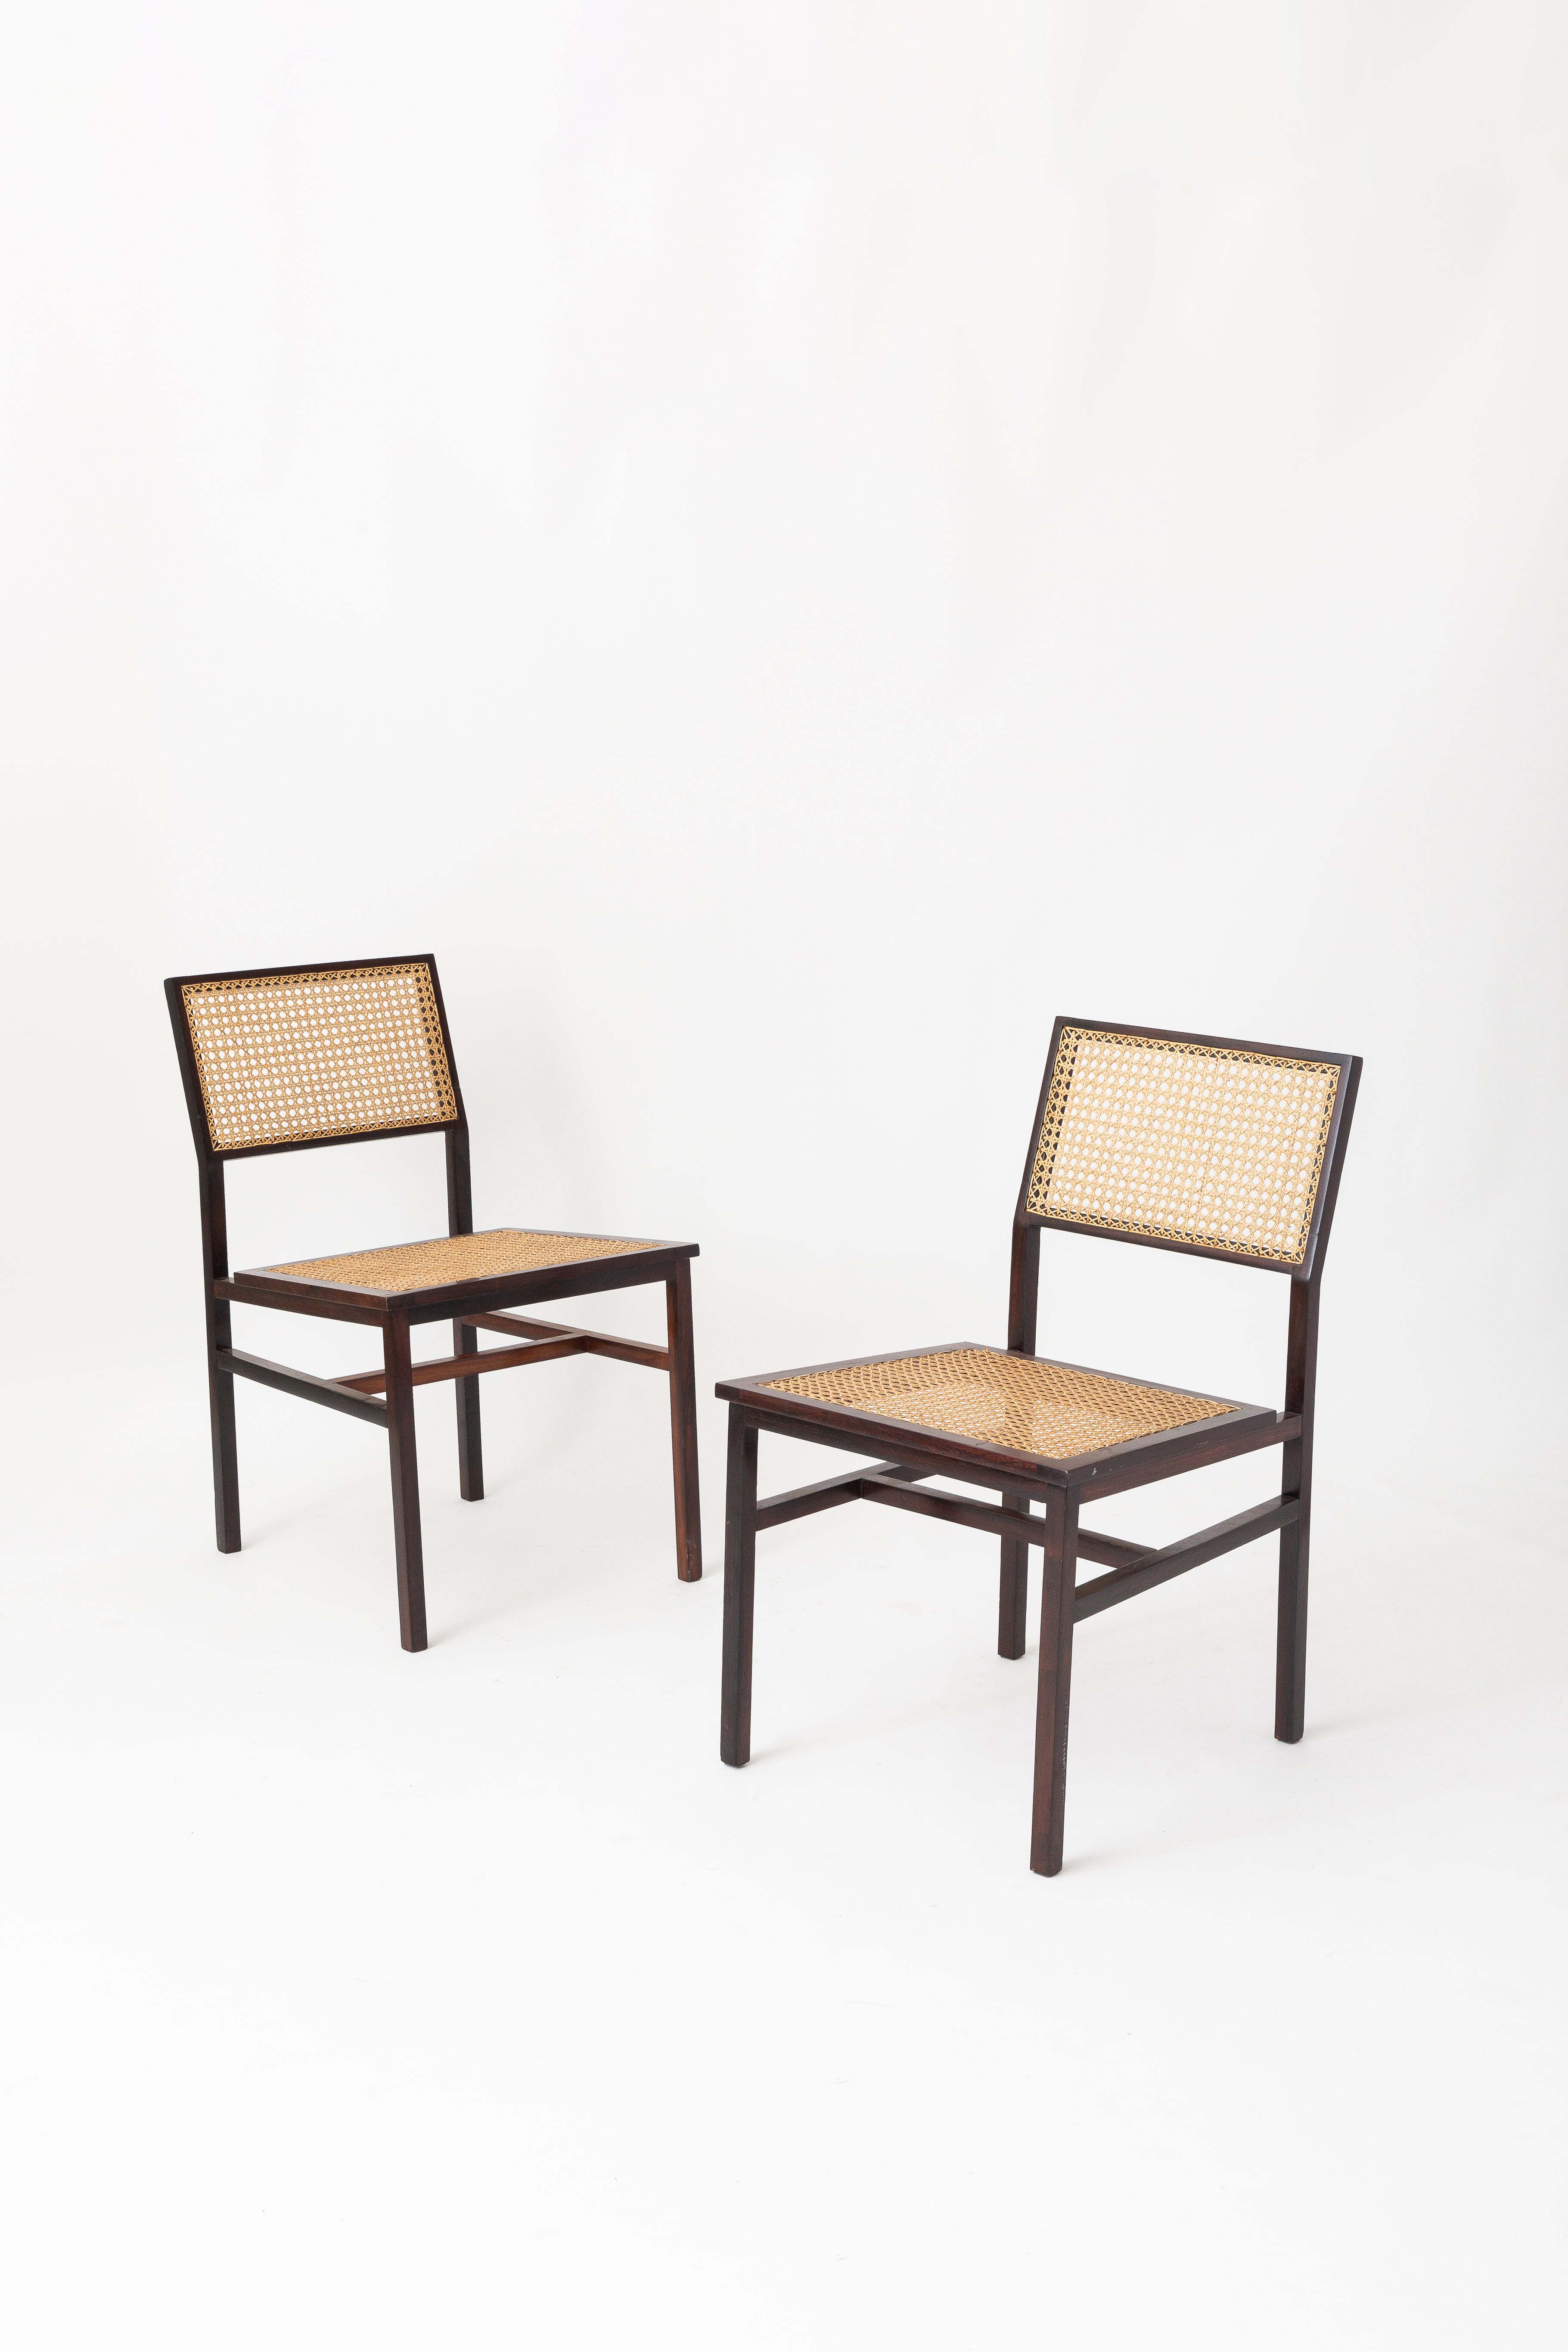 Tenreiro pair of wood and cane chairs (with original label)